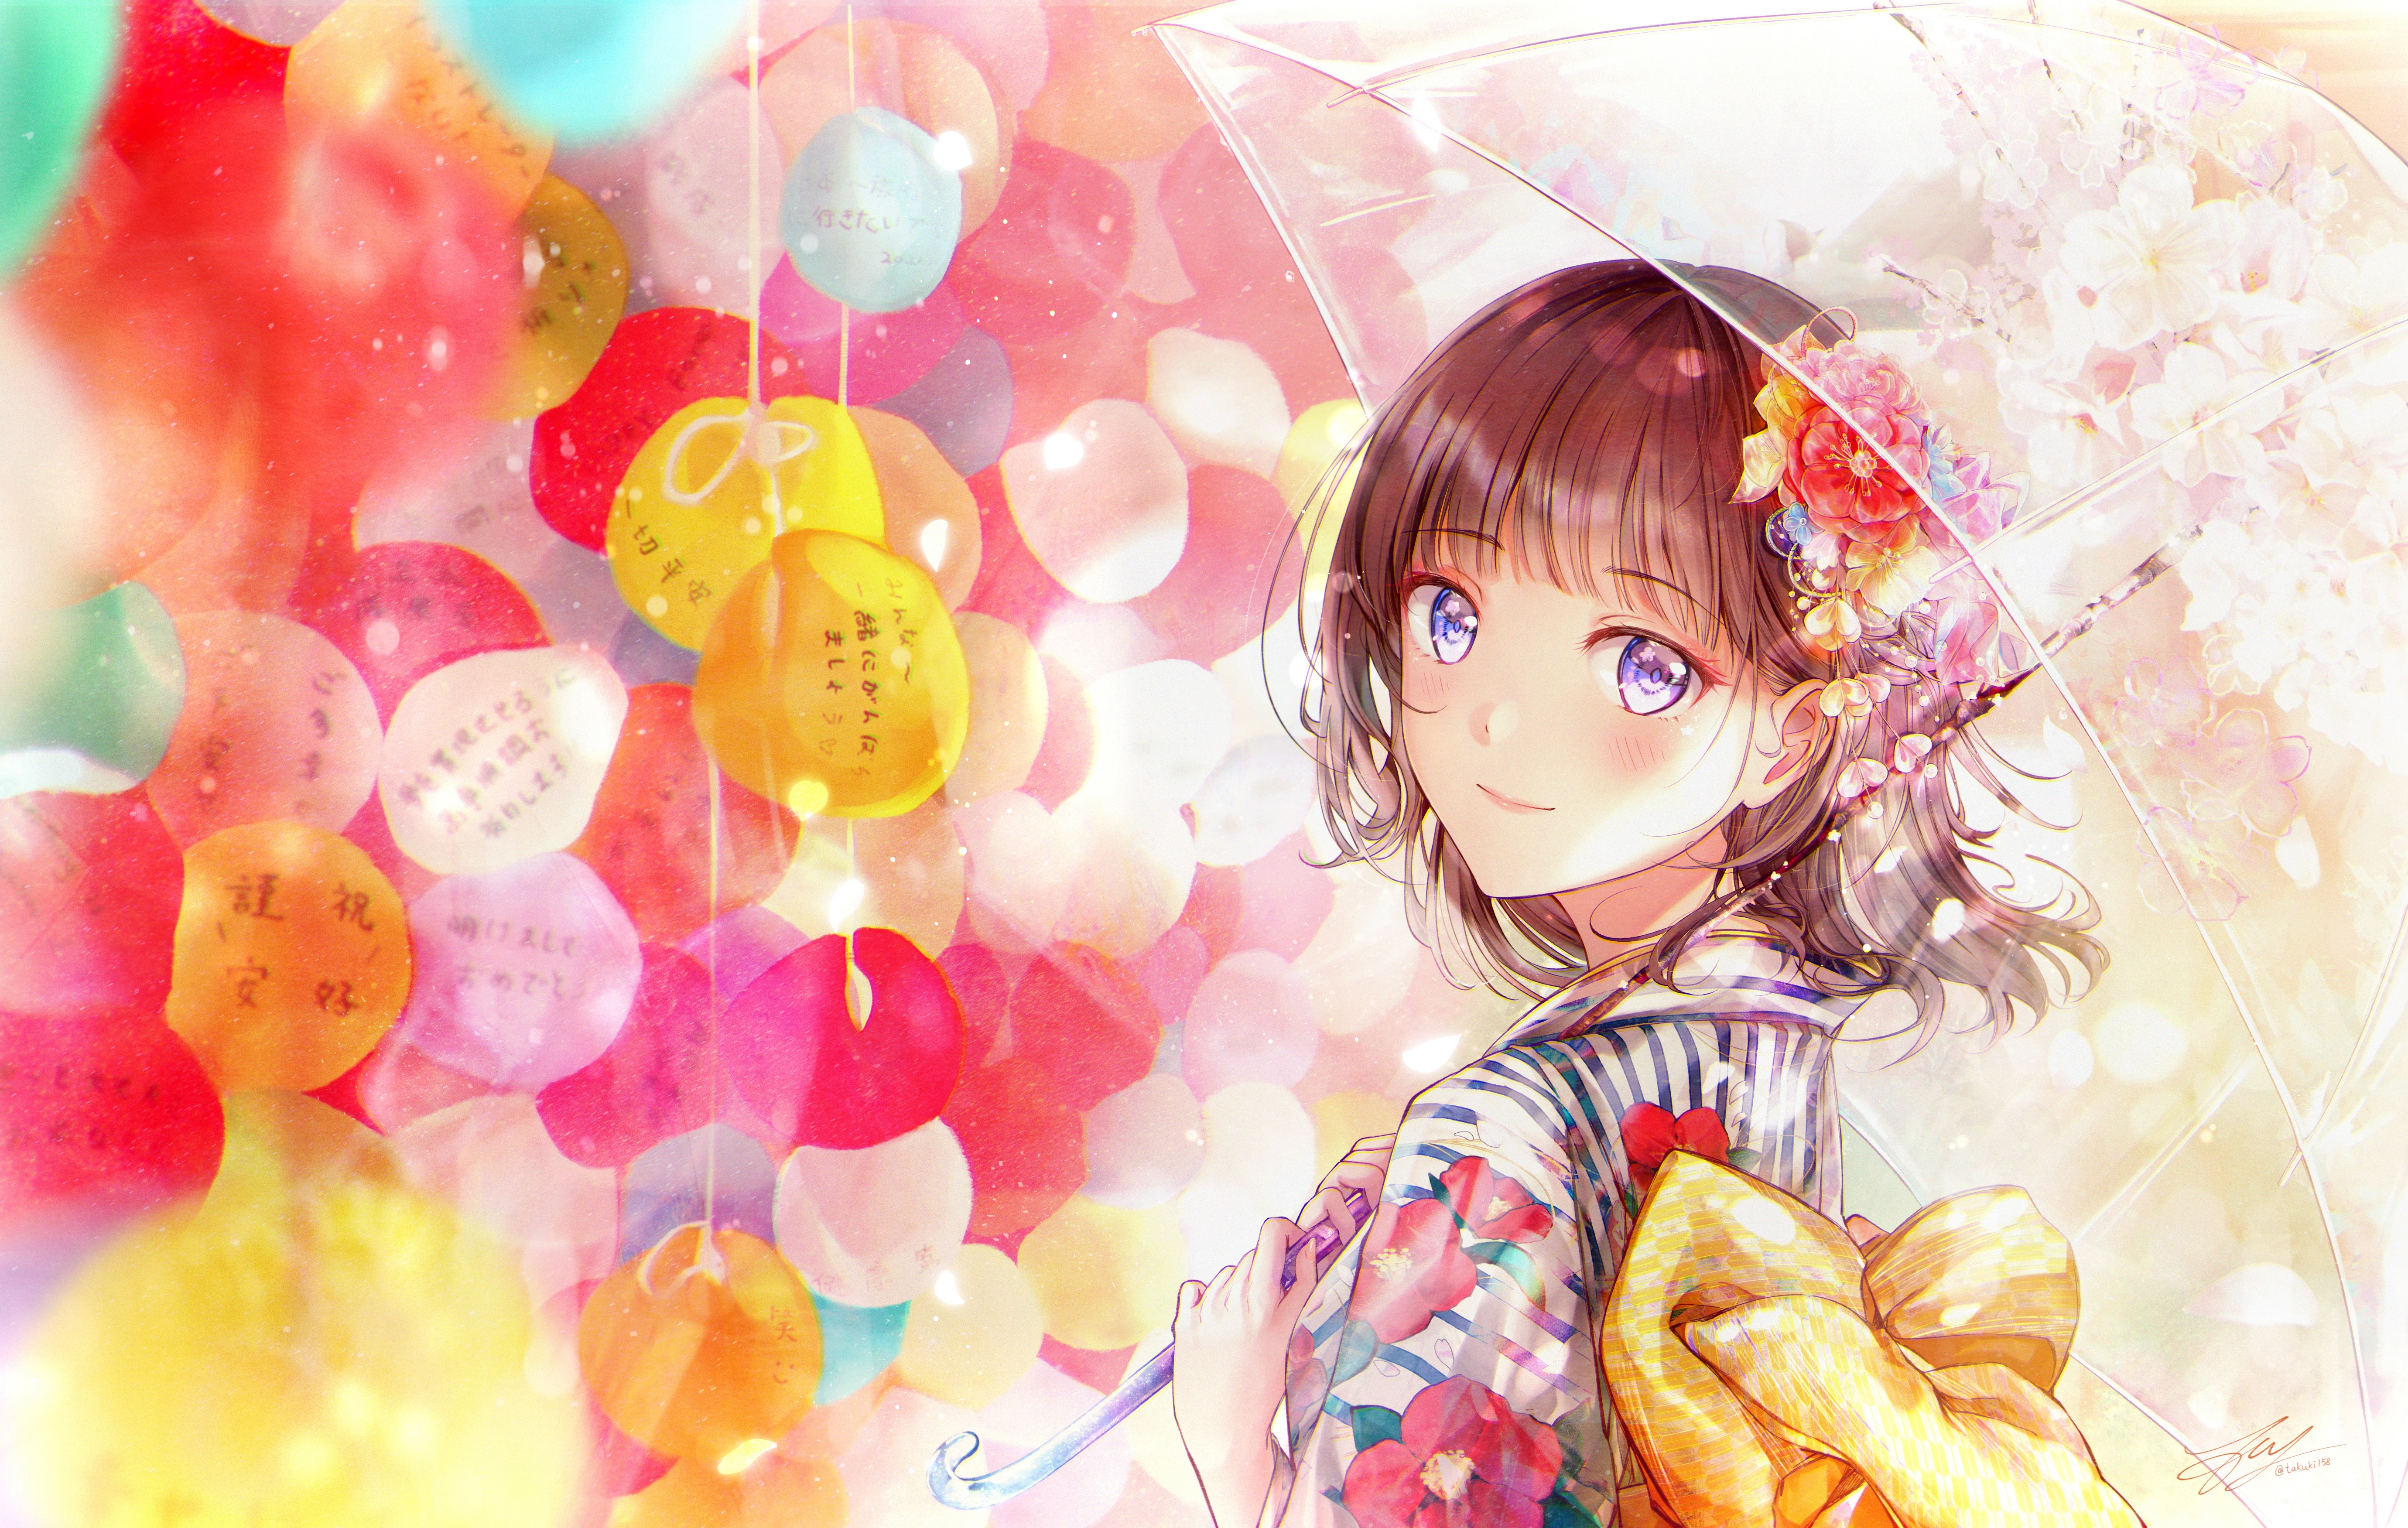 HD wallpaper, Floral Background, Girly Backgrounds, 5K, Anime Girl, Colorful Background